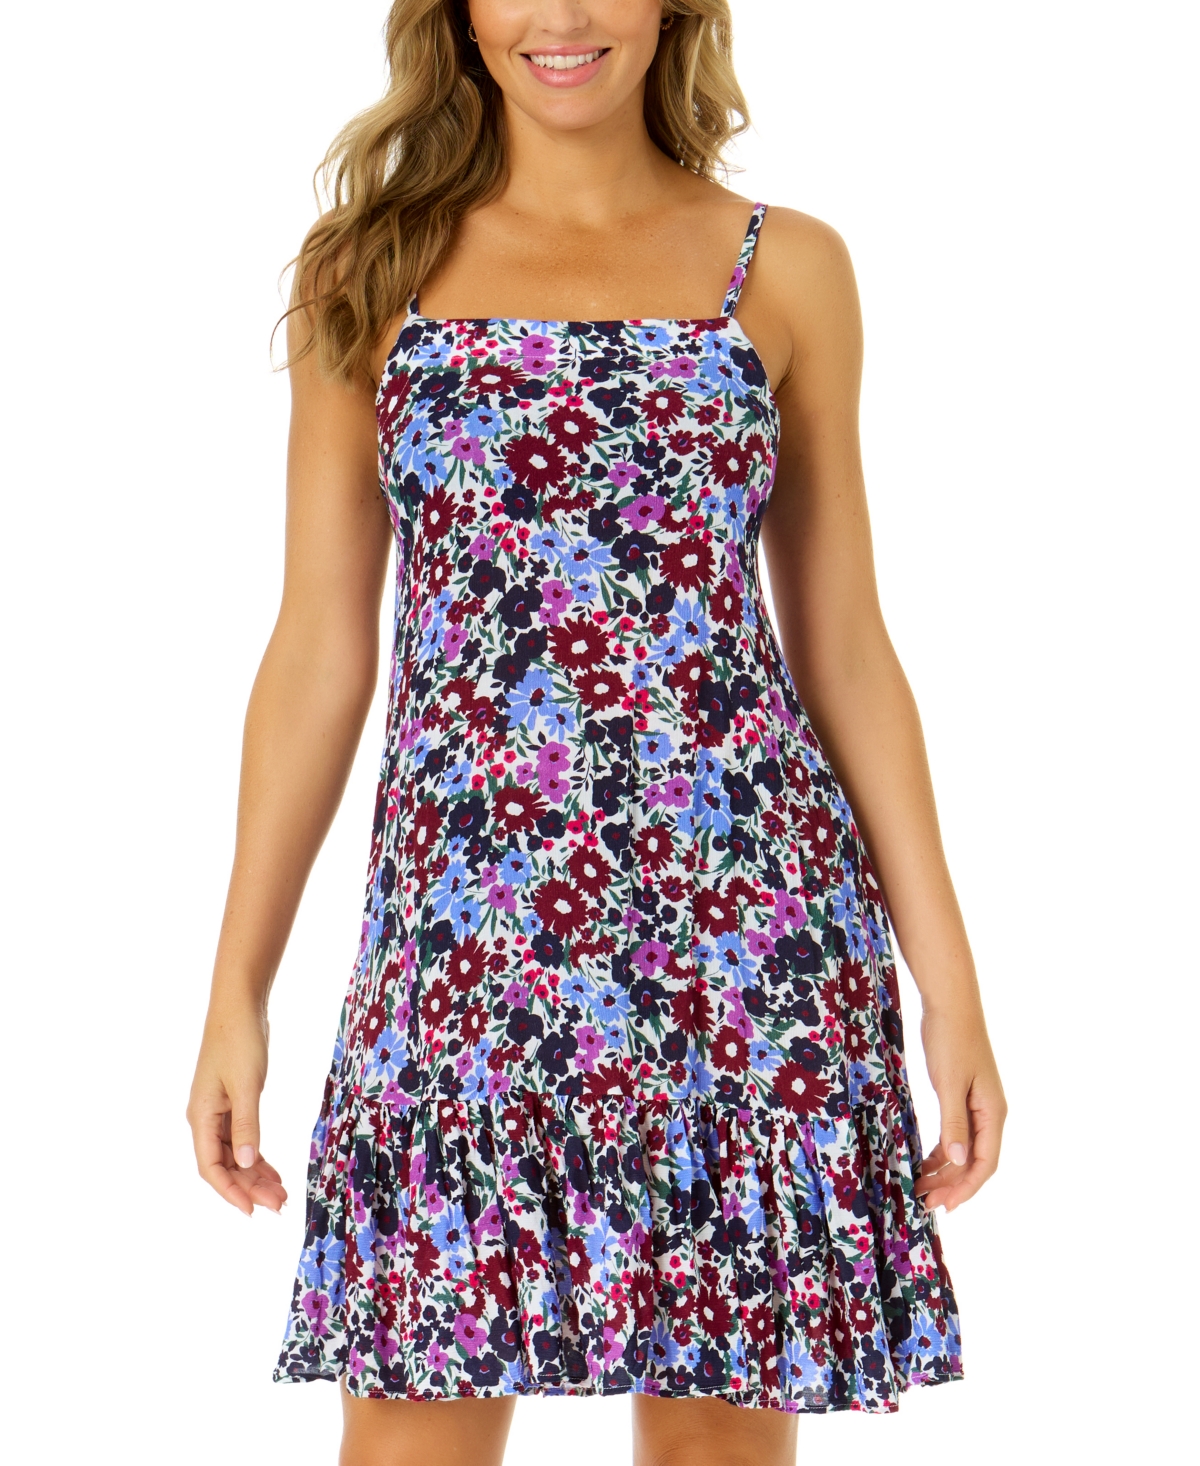 Women's Floral-Print Ruffle Cover-Up Dress - Navy Disty Floral